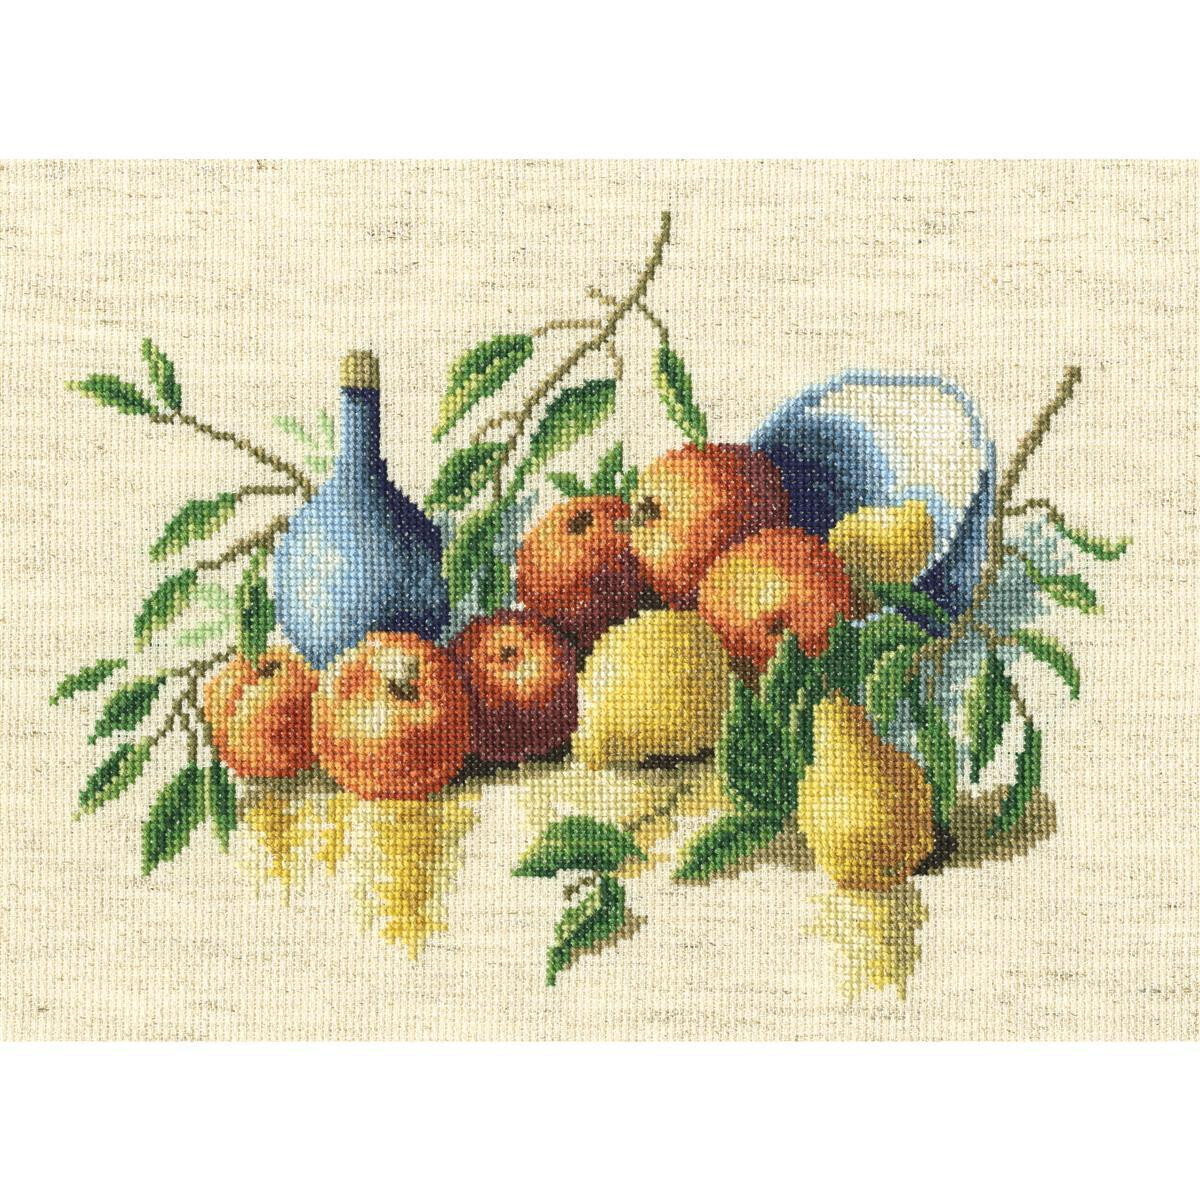 RTO counted Cross Stitch Kit "Still life with...